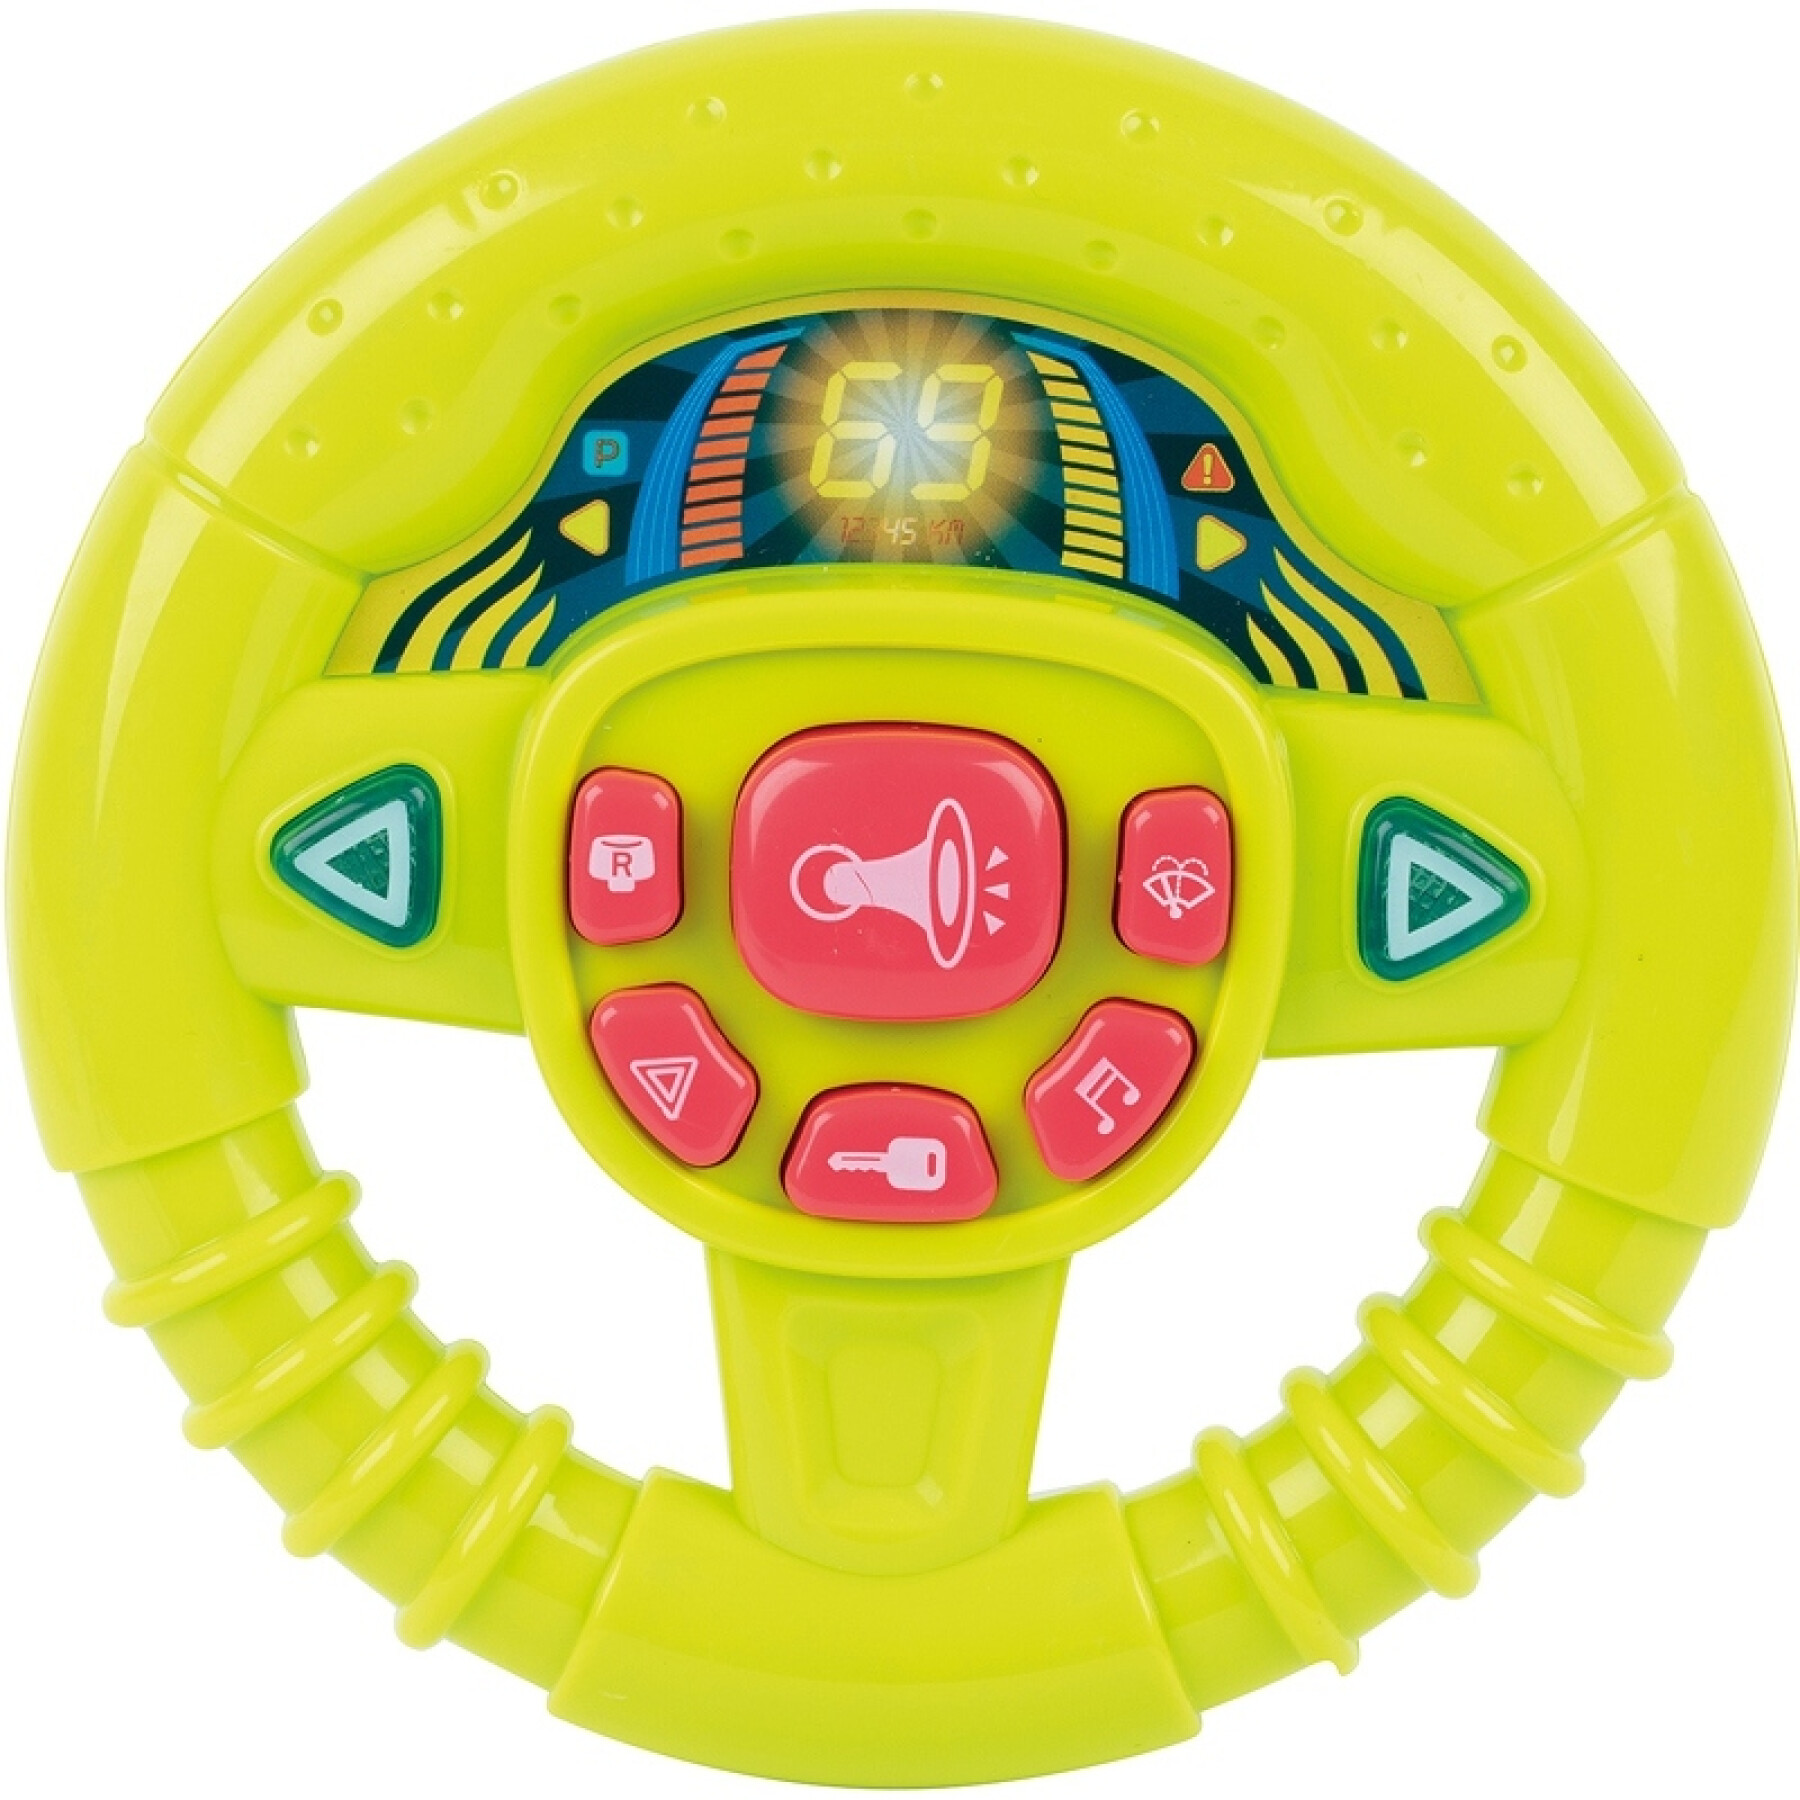 Electric flying play set with sound and light Wonderkids